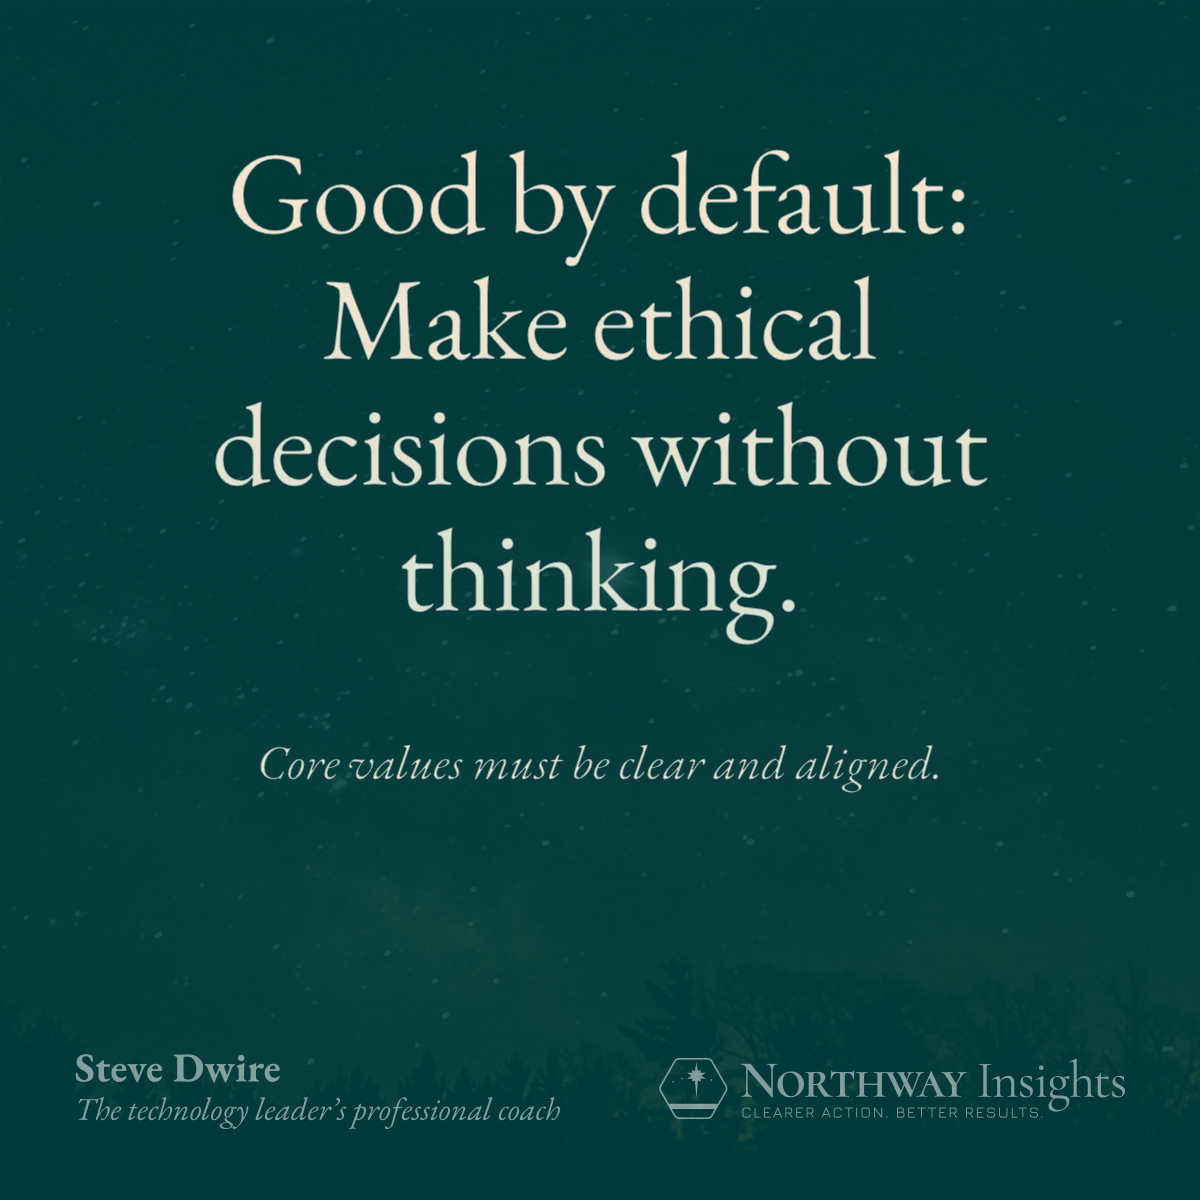 Good by default: Make ethical decisions without thinking.